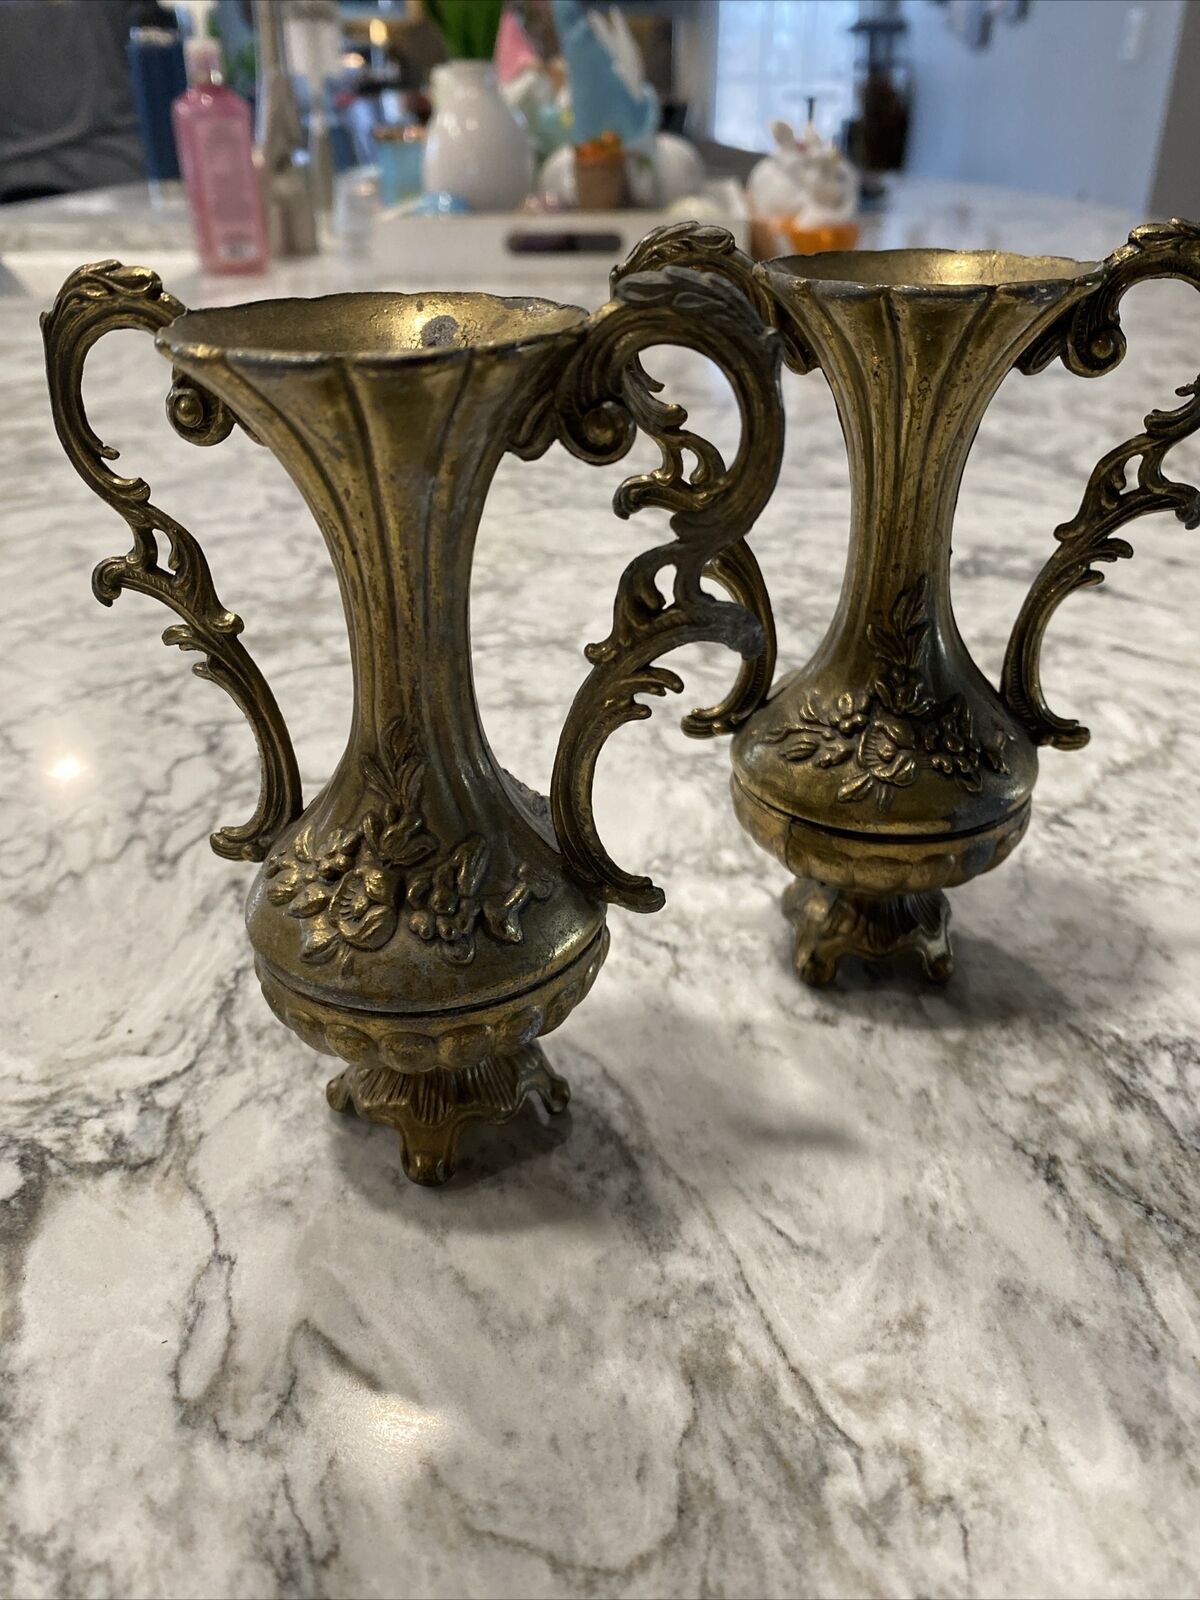 Vintage Italian Florentine Brass Ornate 5” Footed Vases - Made In Italy Set of 2